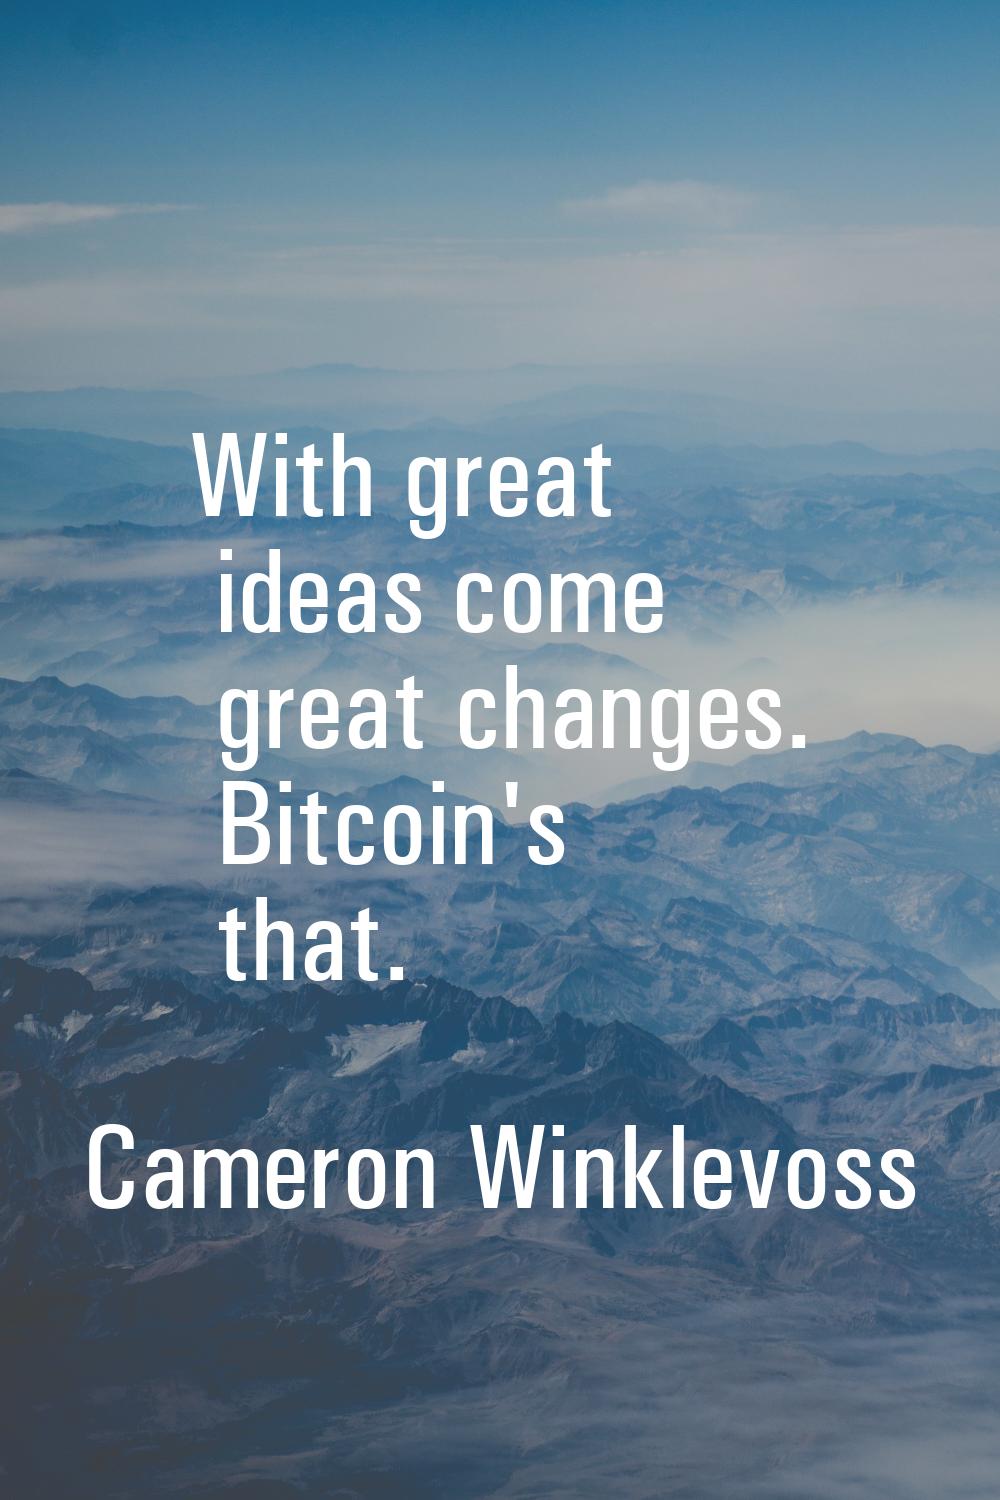 With great ideas come great changes. Bitcoin's that.